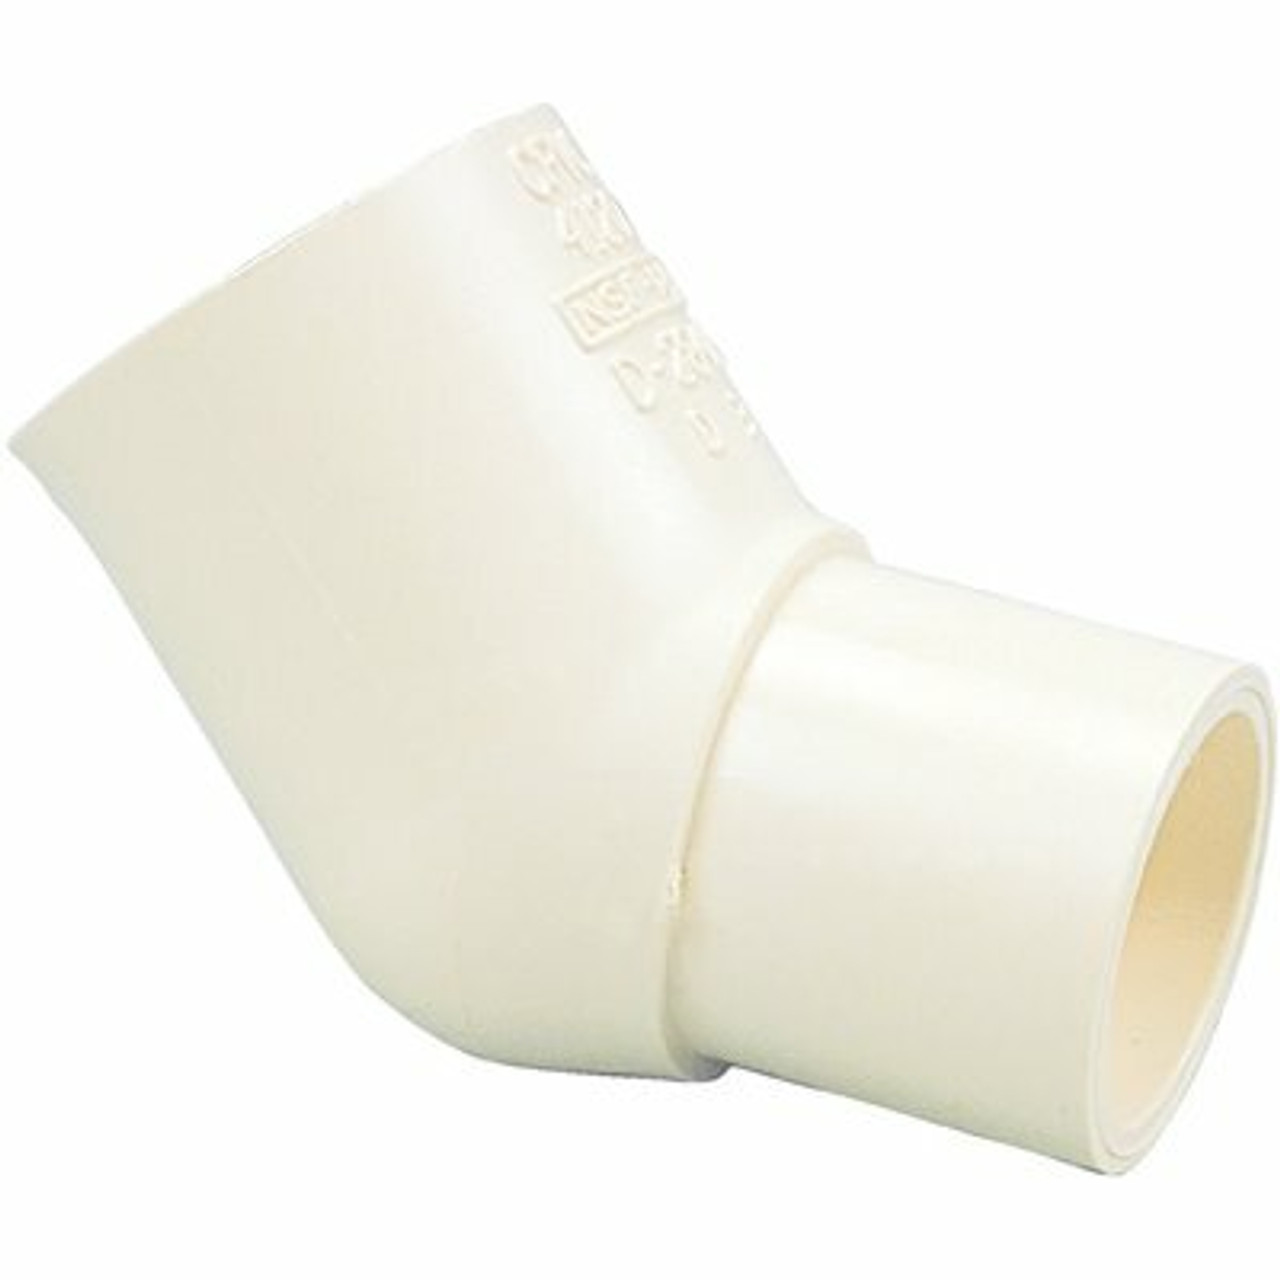 Nibco 1 In. Cpvc Cts Spigot X Female Socket 45-Degree Elbow Fitting